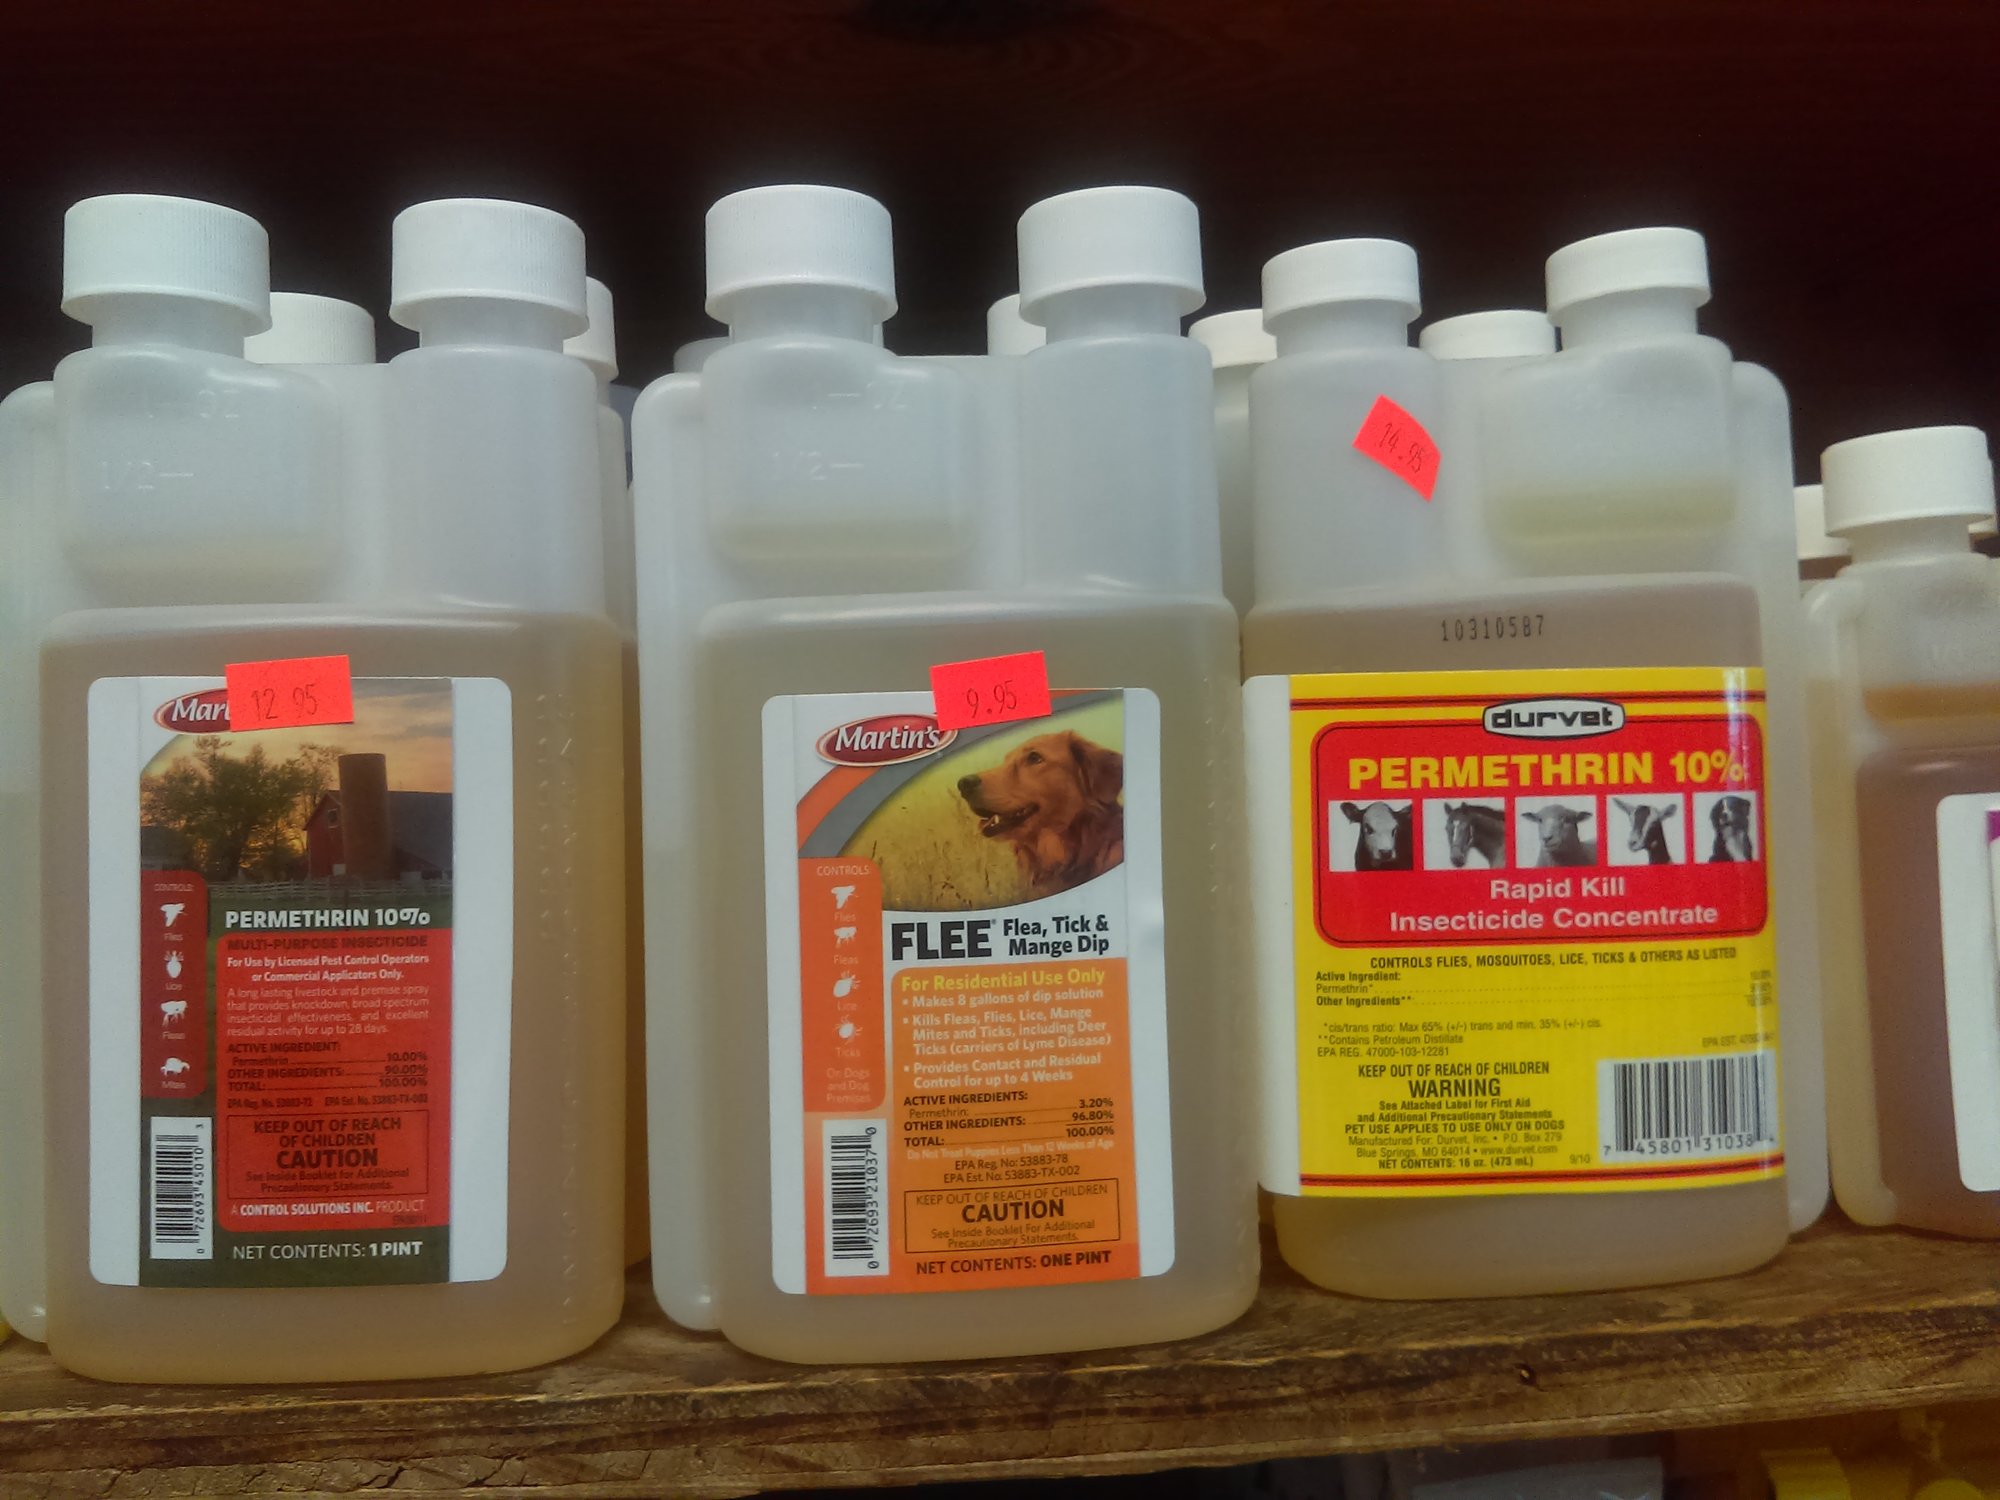 Permethrin Concentrate, Martin's on Left - Durvet on right